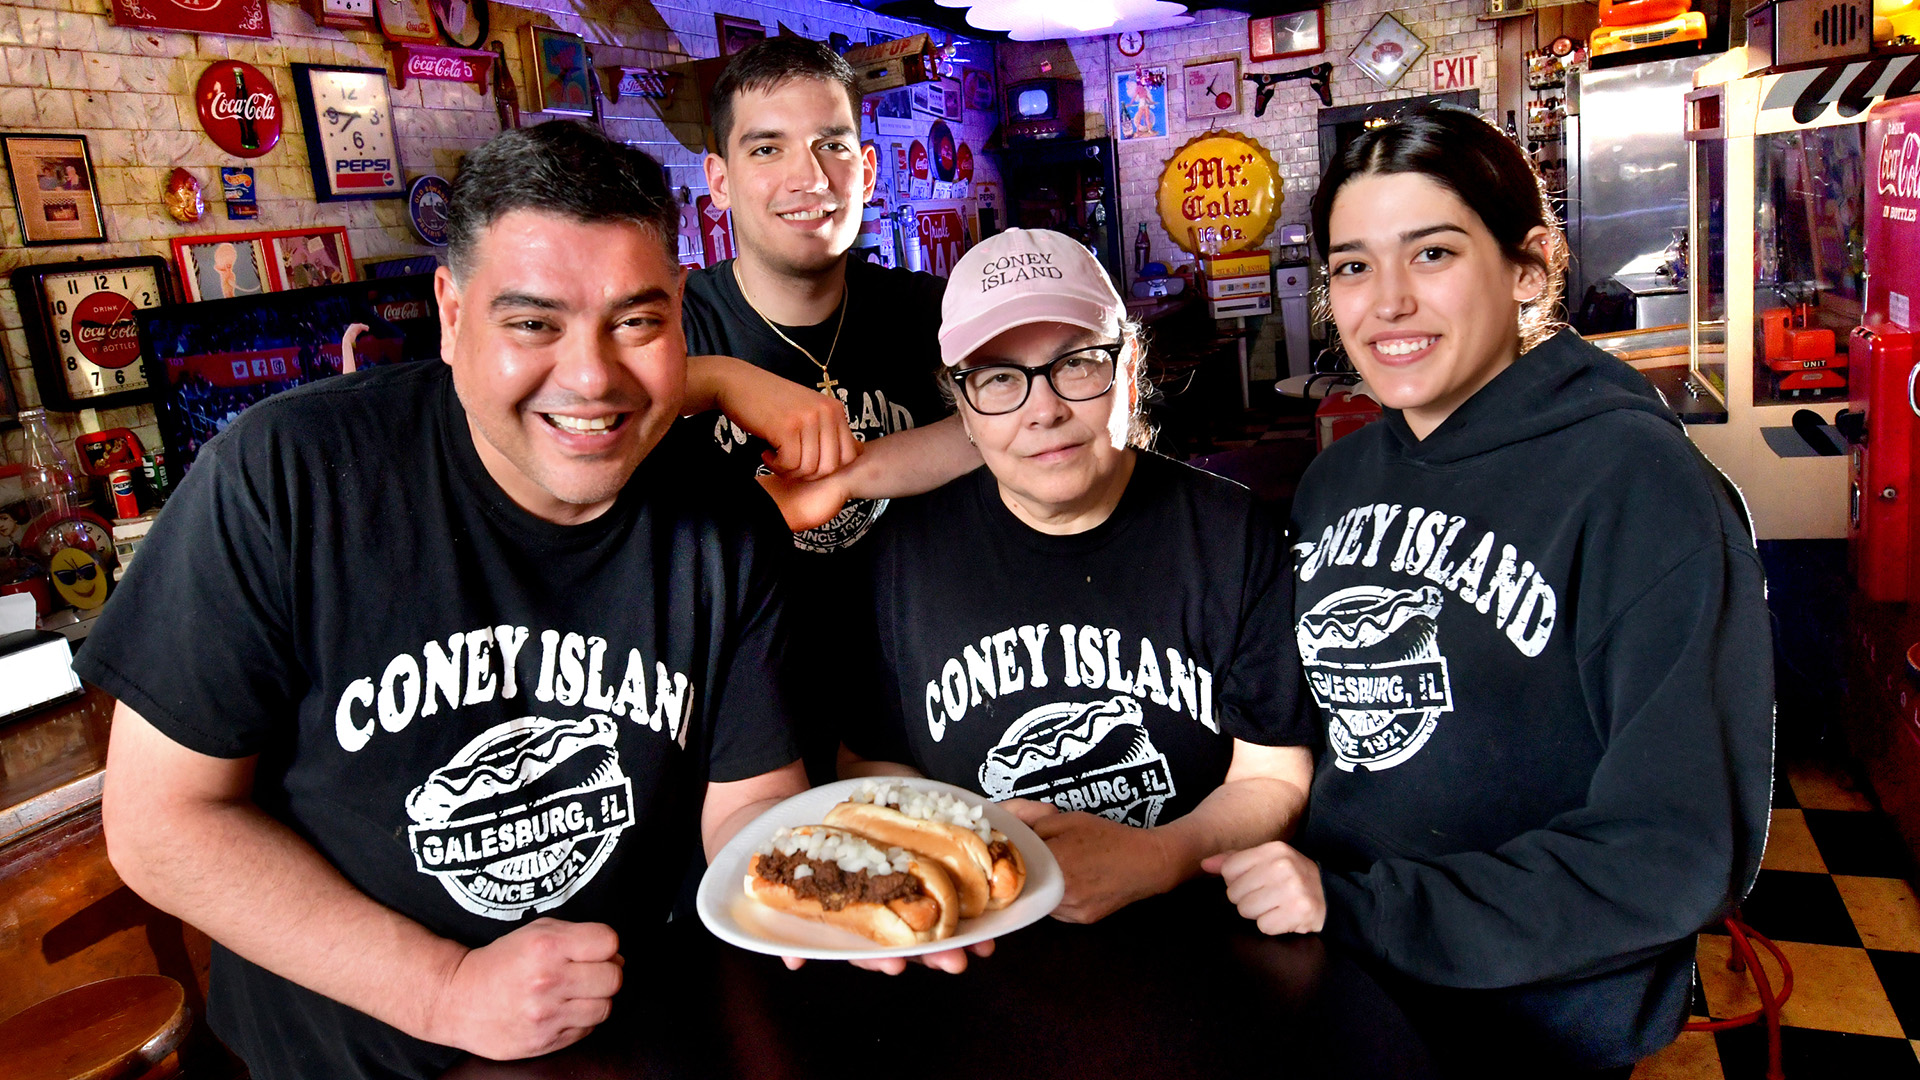 Jesus Valdez and his mother Maria Valdez are owners of Coney Island with son Manny and daughter Mariah